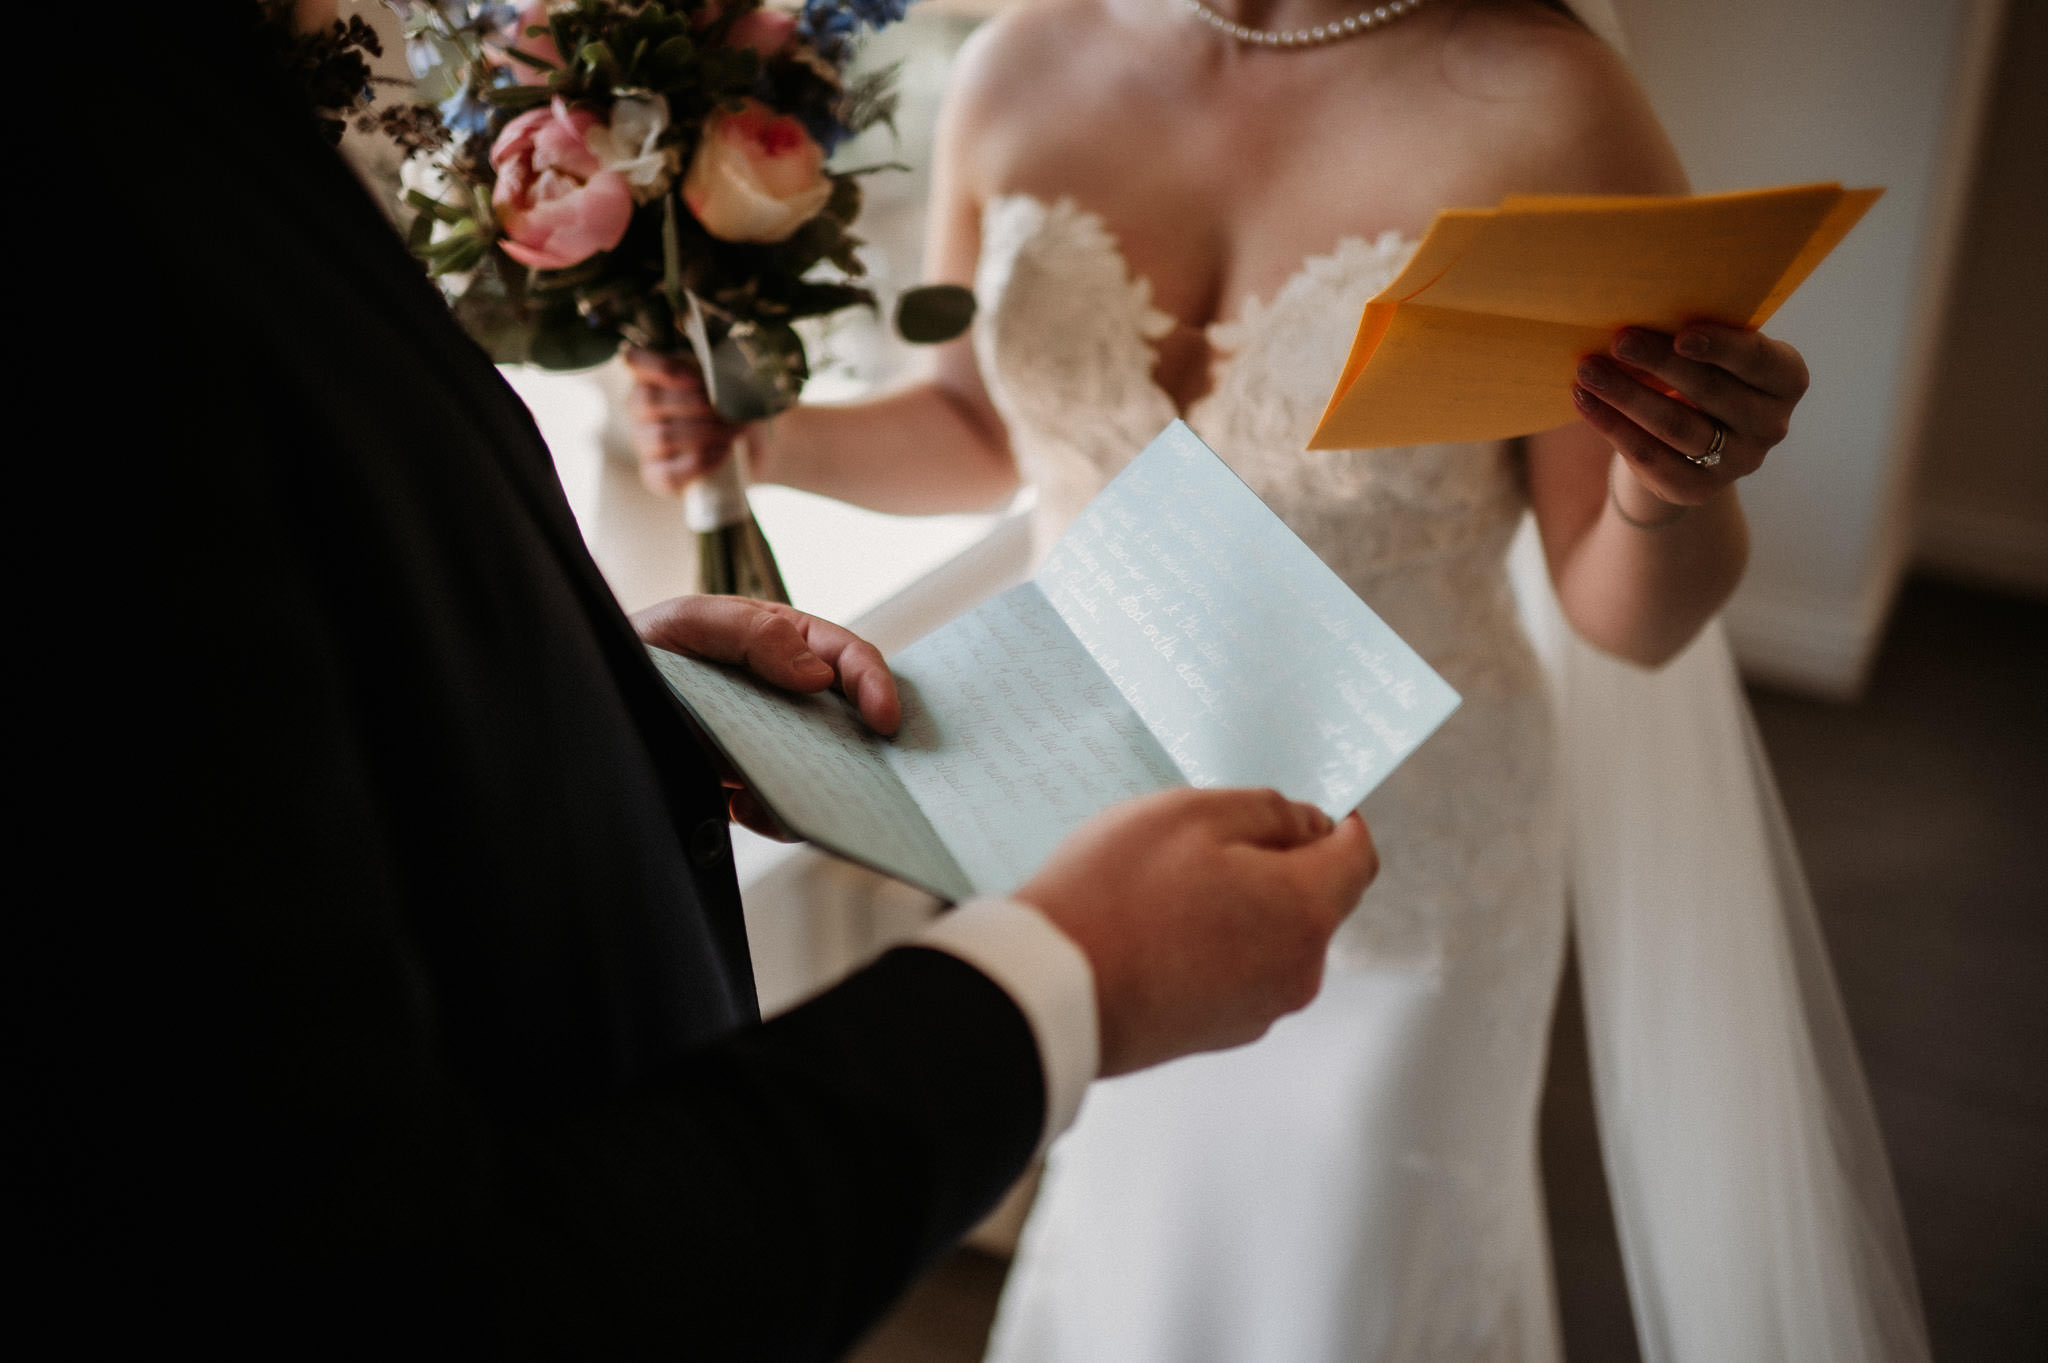 Wedding Photographer Victoria Villa Eyrie Weddings Bride and Groom Wedding Letters Vows